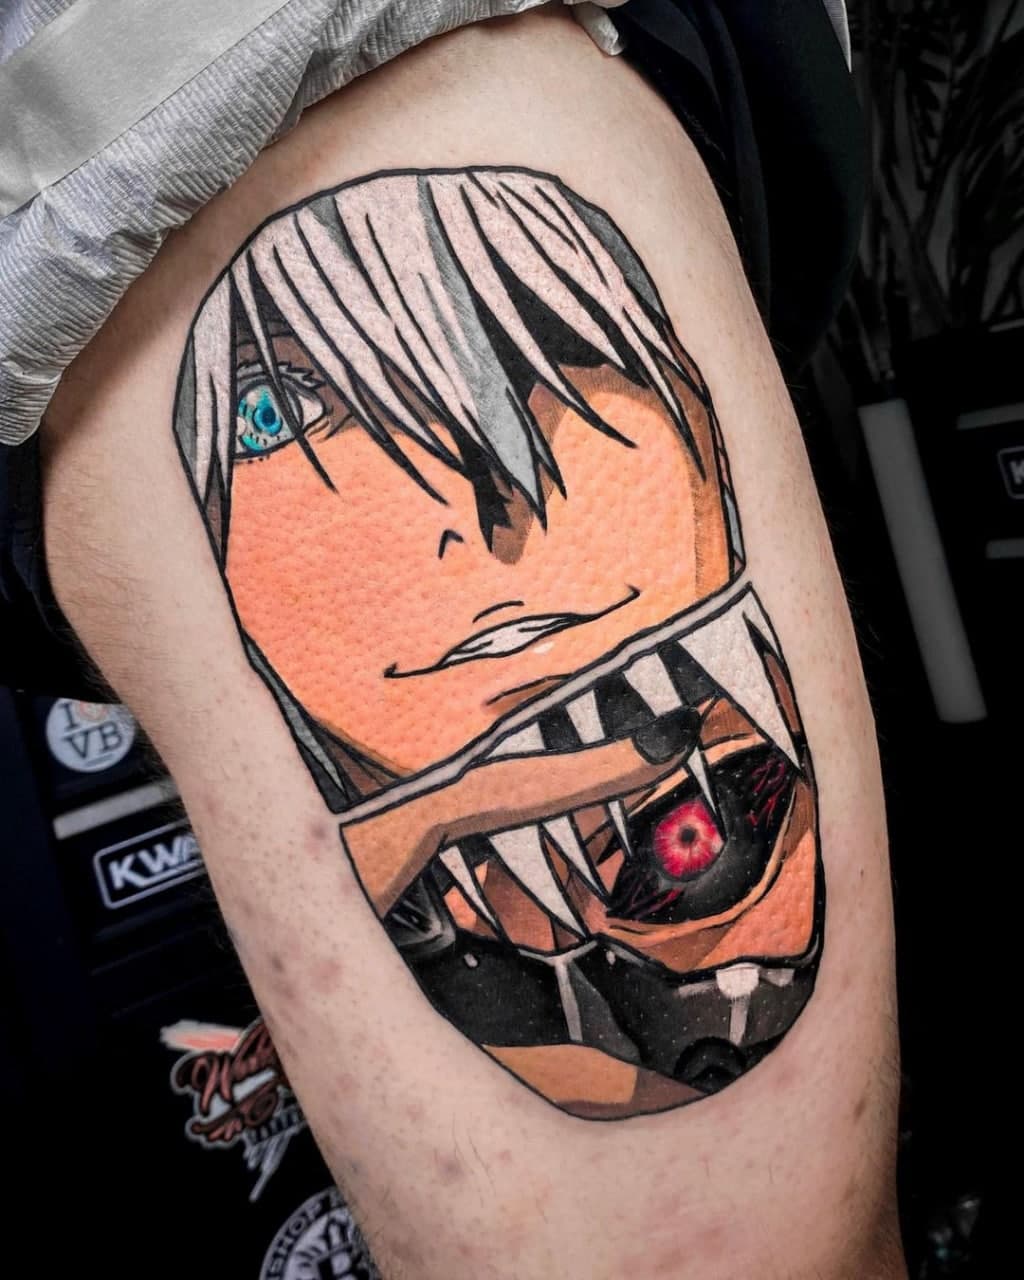 HorikiTattoos в Twitter First post on Twitter How exciting lol here is a  picture of a fun tattoo I did of Kaneki from Tokyo Ghoul  hope everyone  is having a great